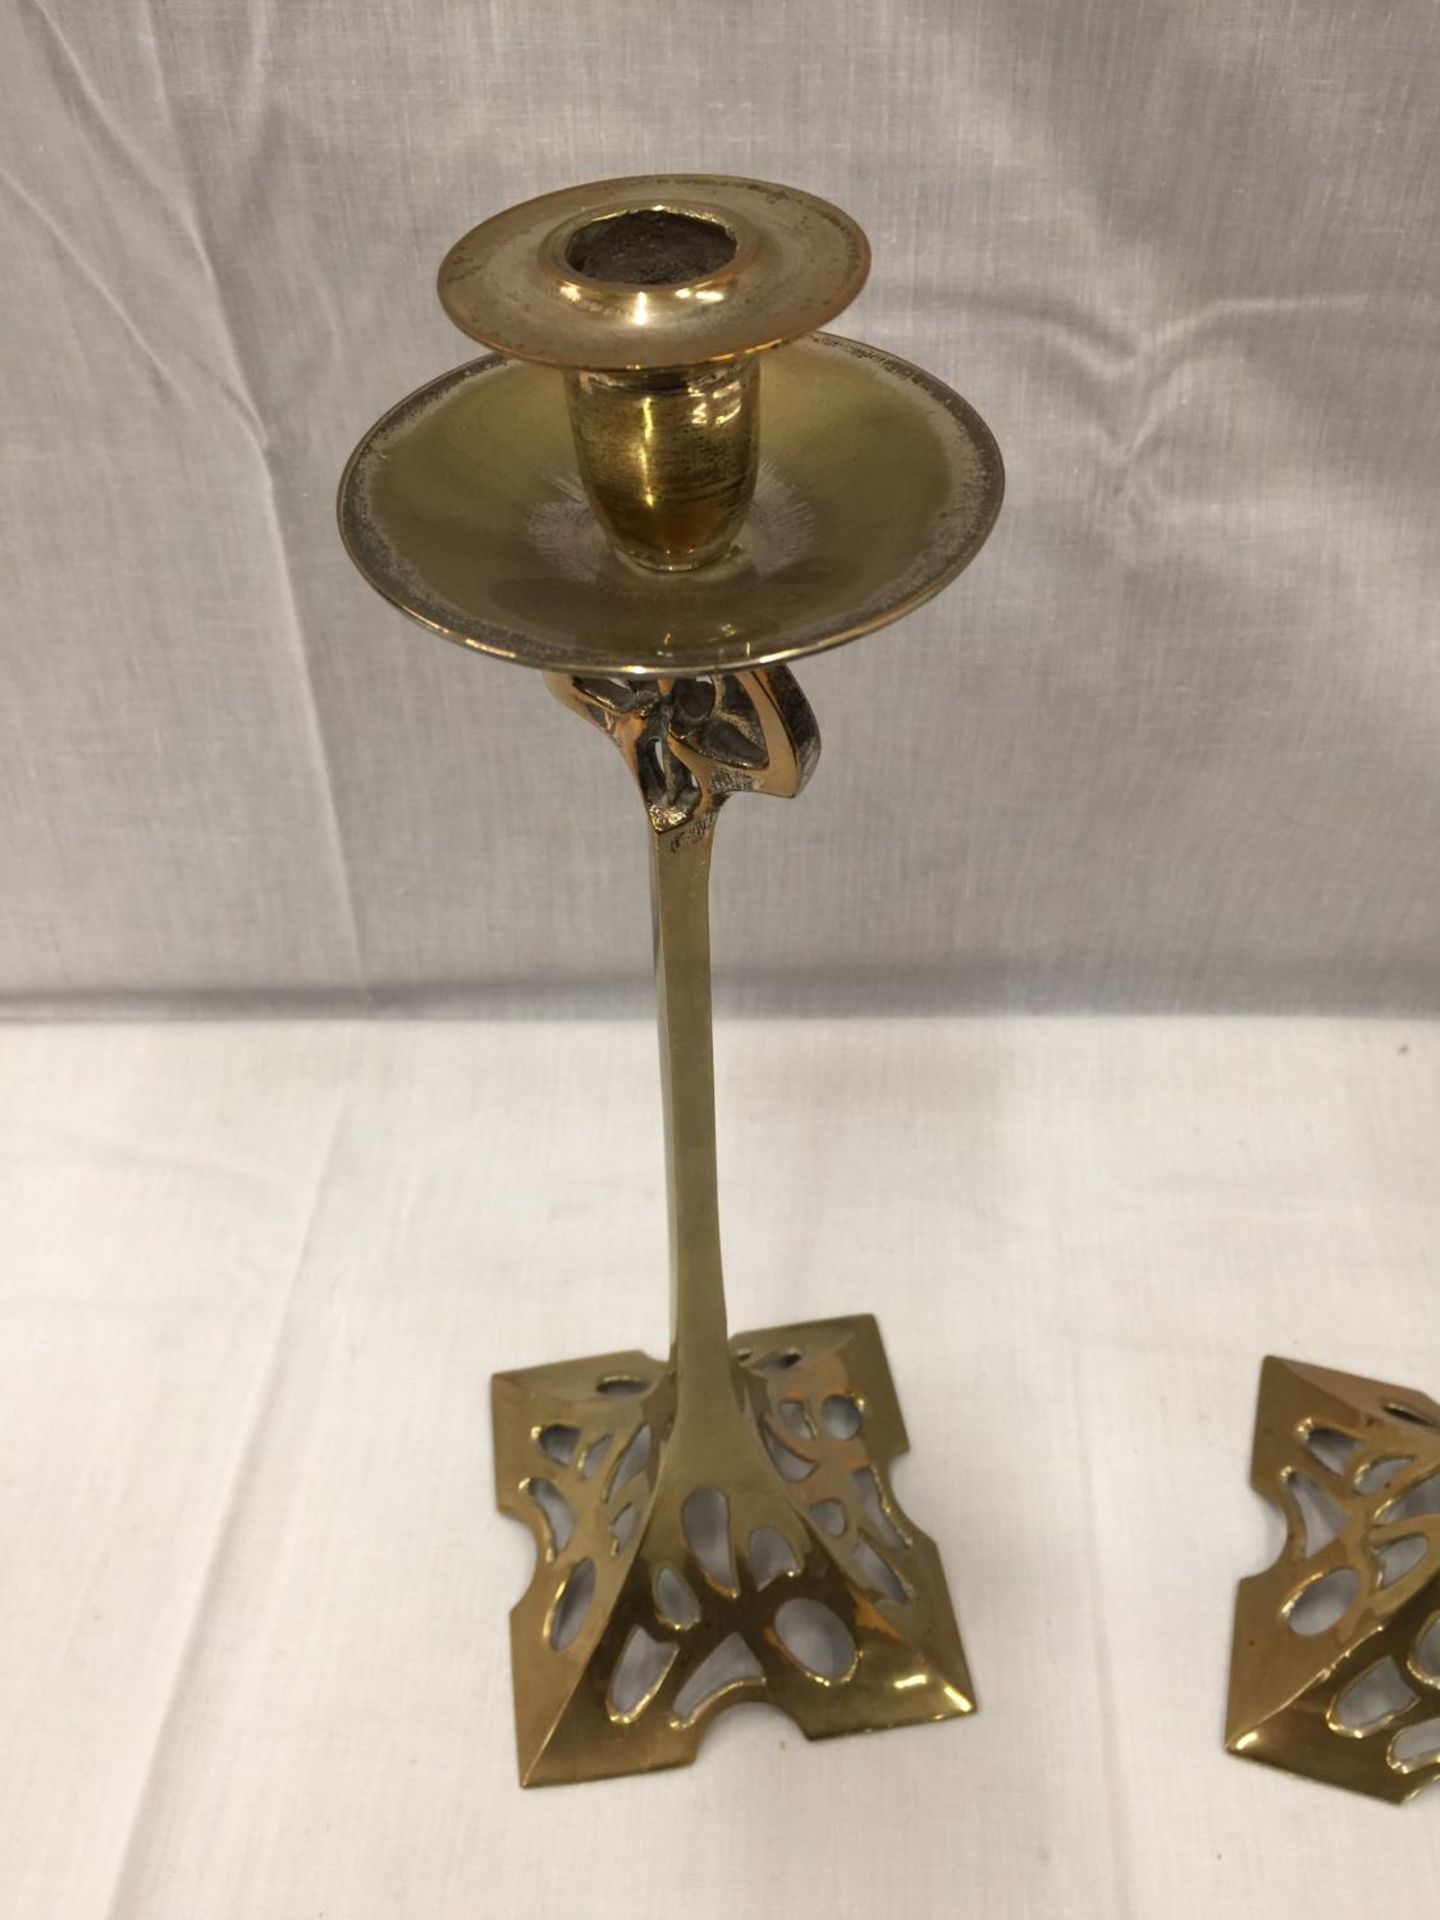 A PAIR OF TALL BRASS ARTS & CRAFTS STYLE CANDLESTICKS 38CM TALL - Image 2 of 3